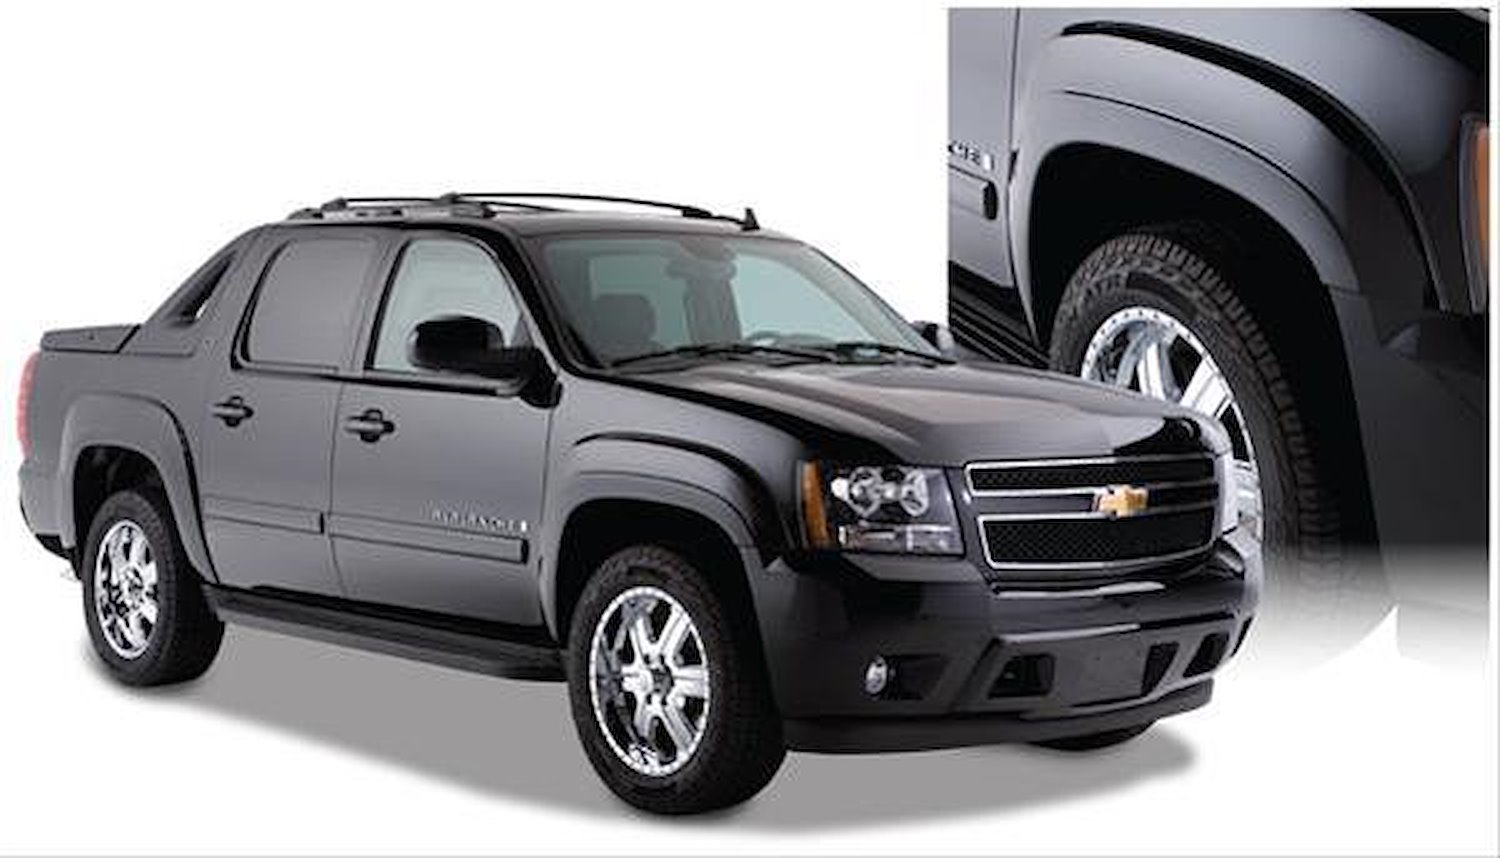 OE-Style Fender Flares 2007-13 Chevy Avalanche